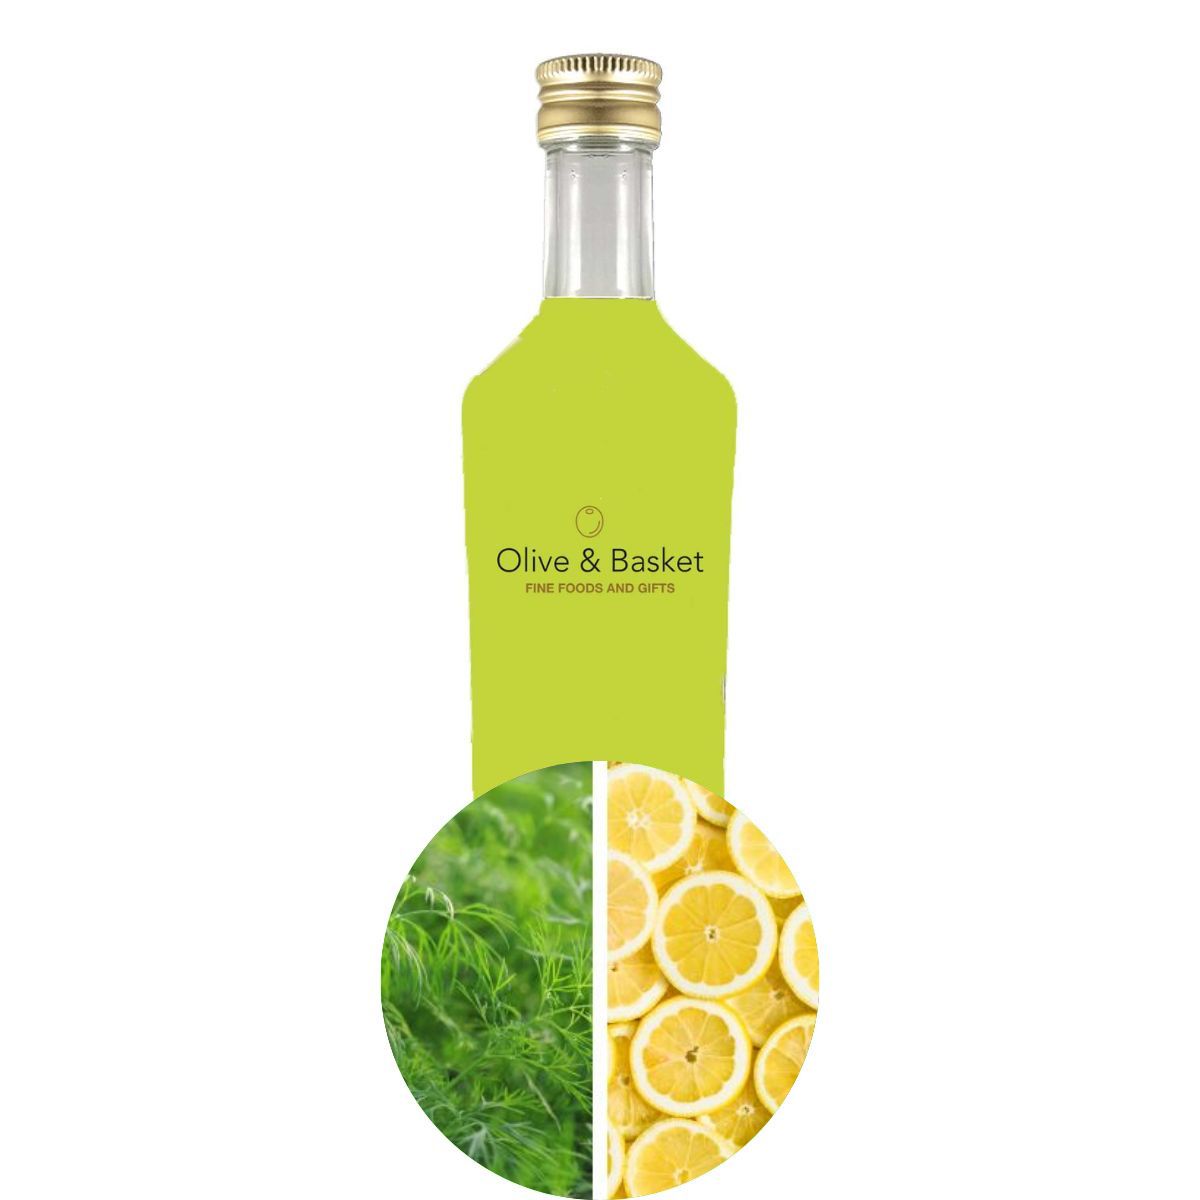 Dill Lemon Olive Oil- Great for seafood